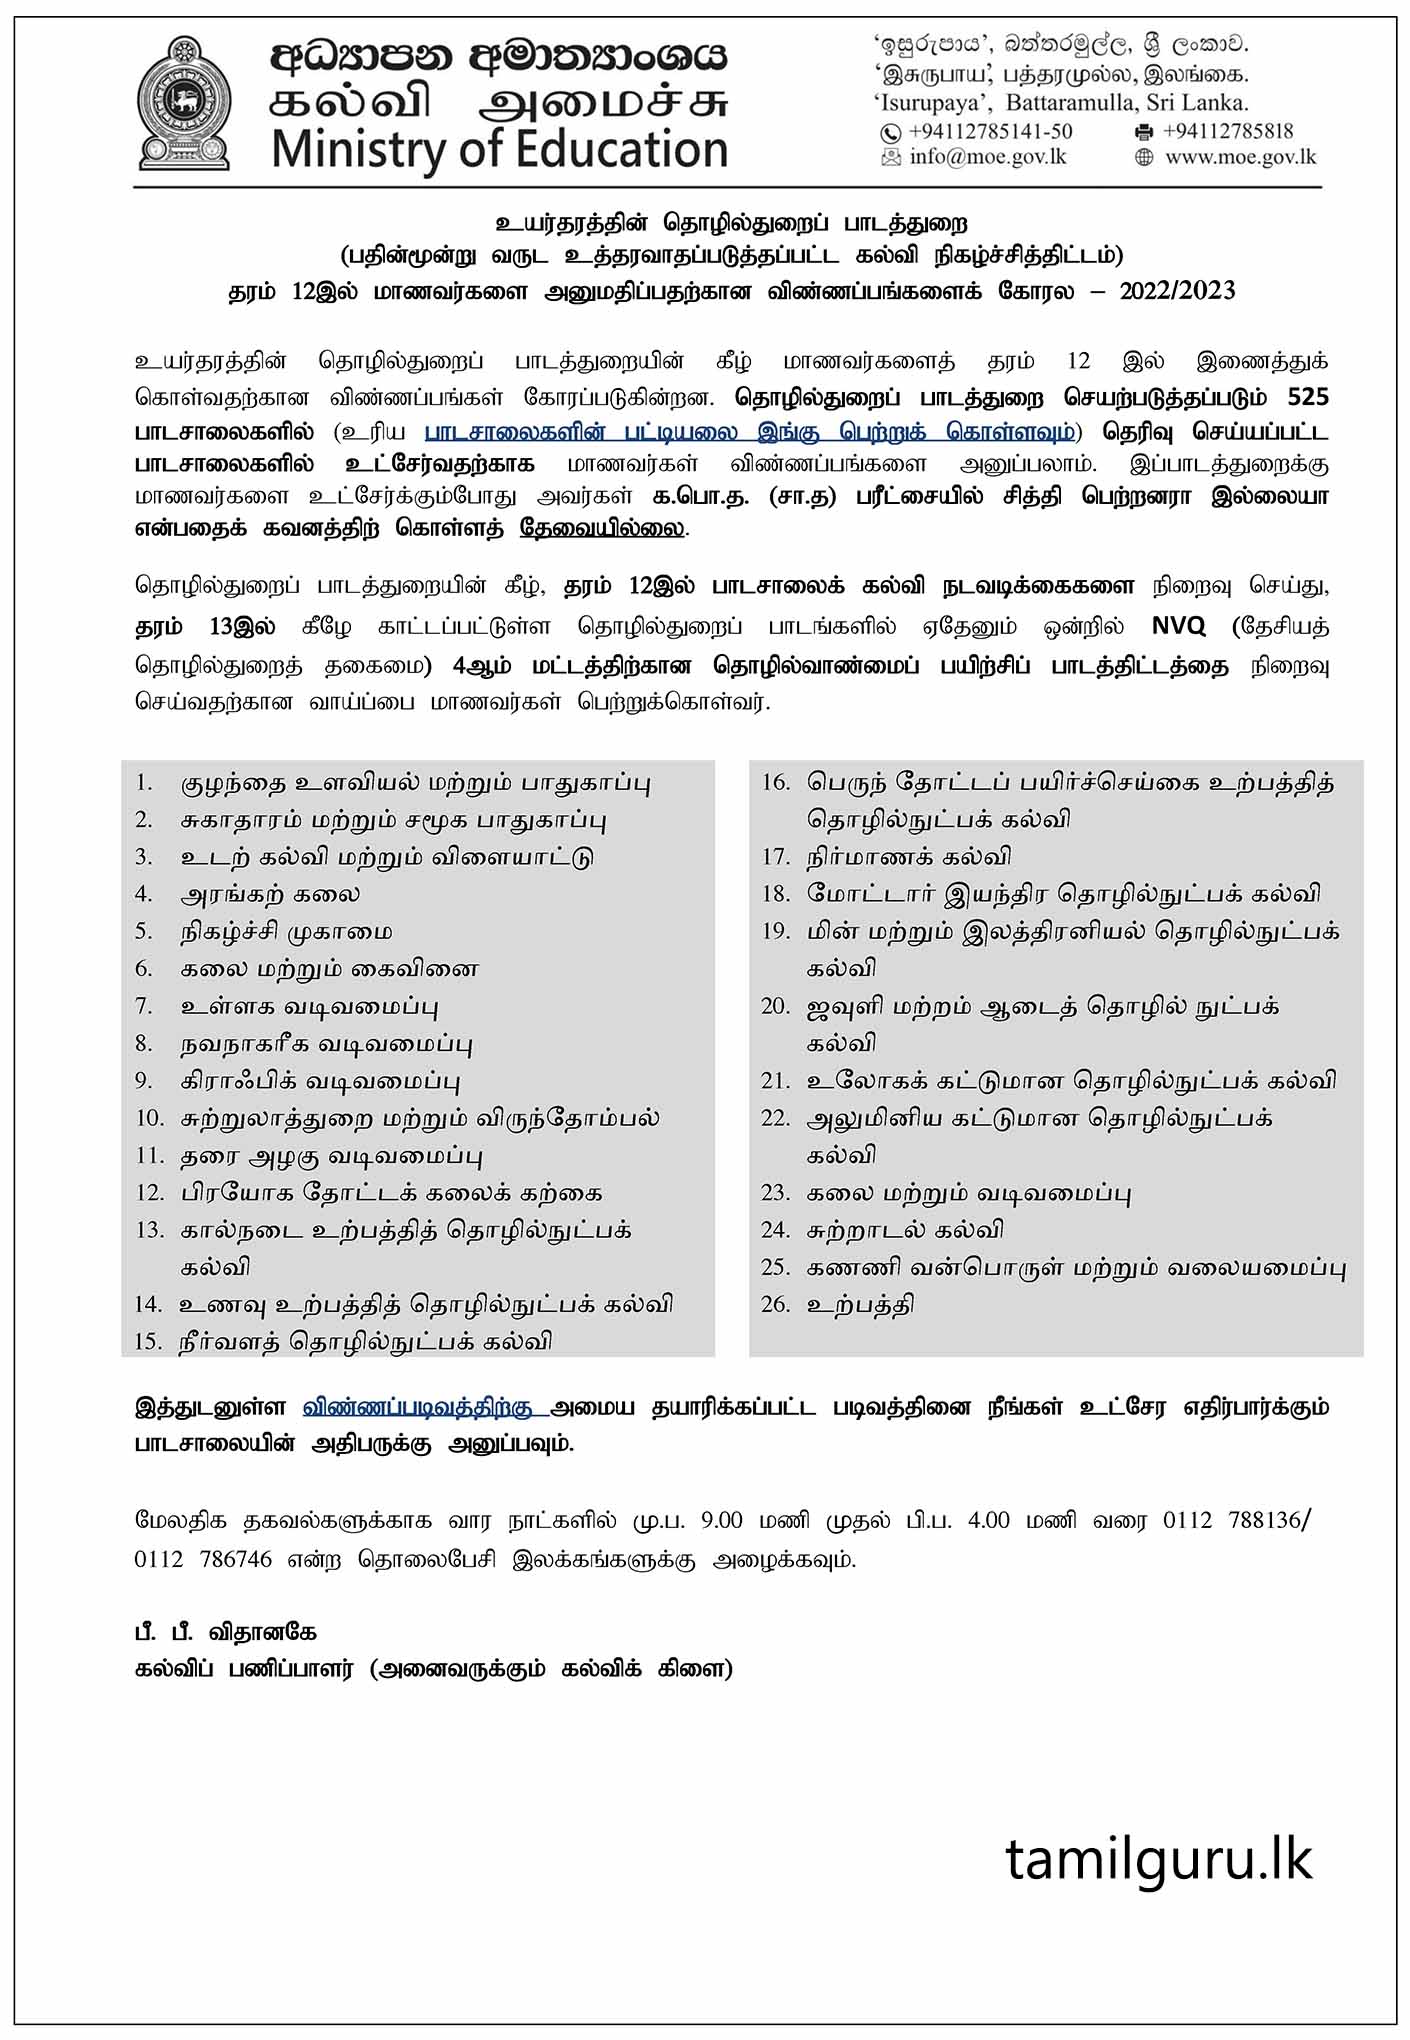 Calling Applications for Admission to Grade 12 - GCE A/L Vocational Stream (Thirteen Years Guaranteed Education Programm) 2022/2023 - Ministry of Education, Sri Lanka